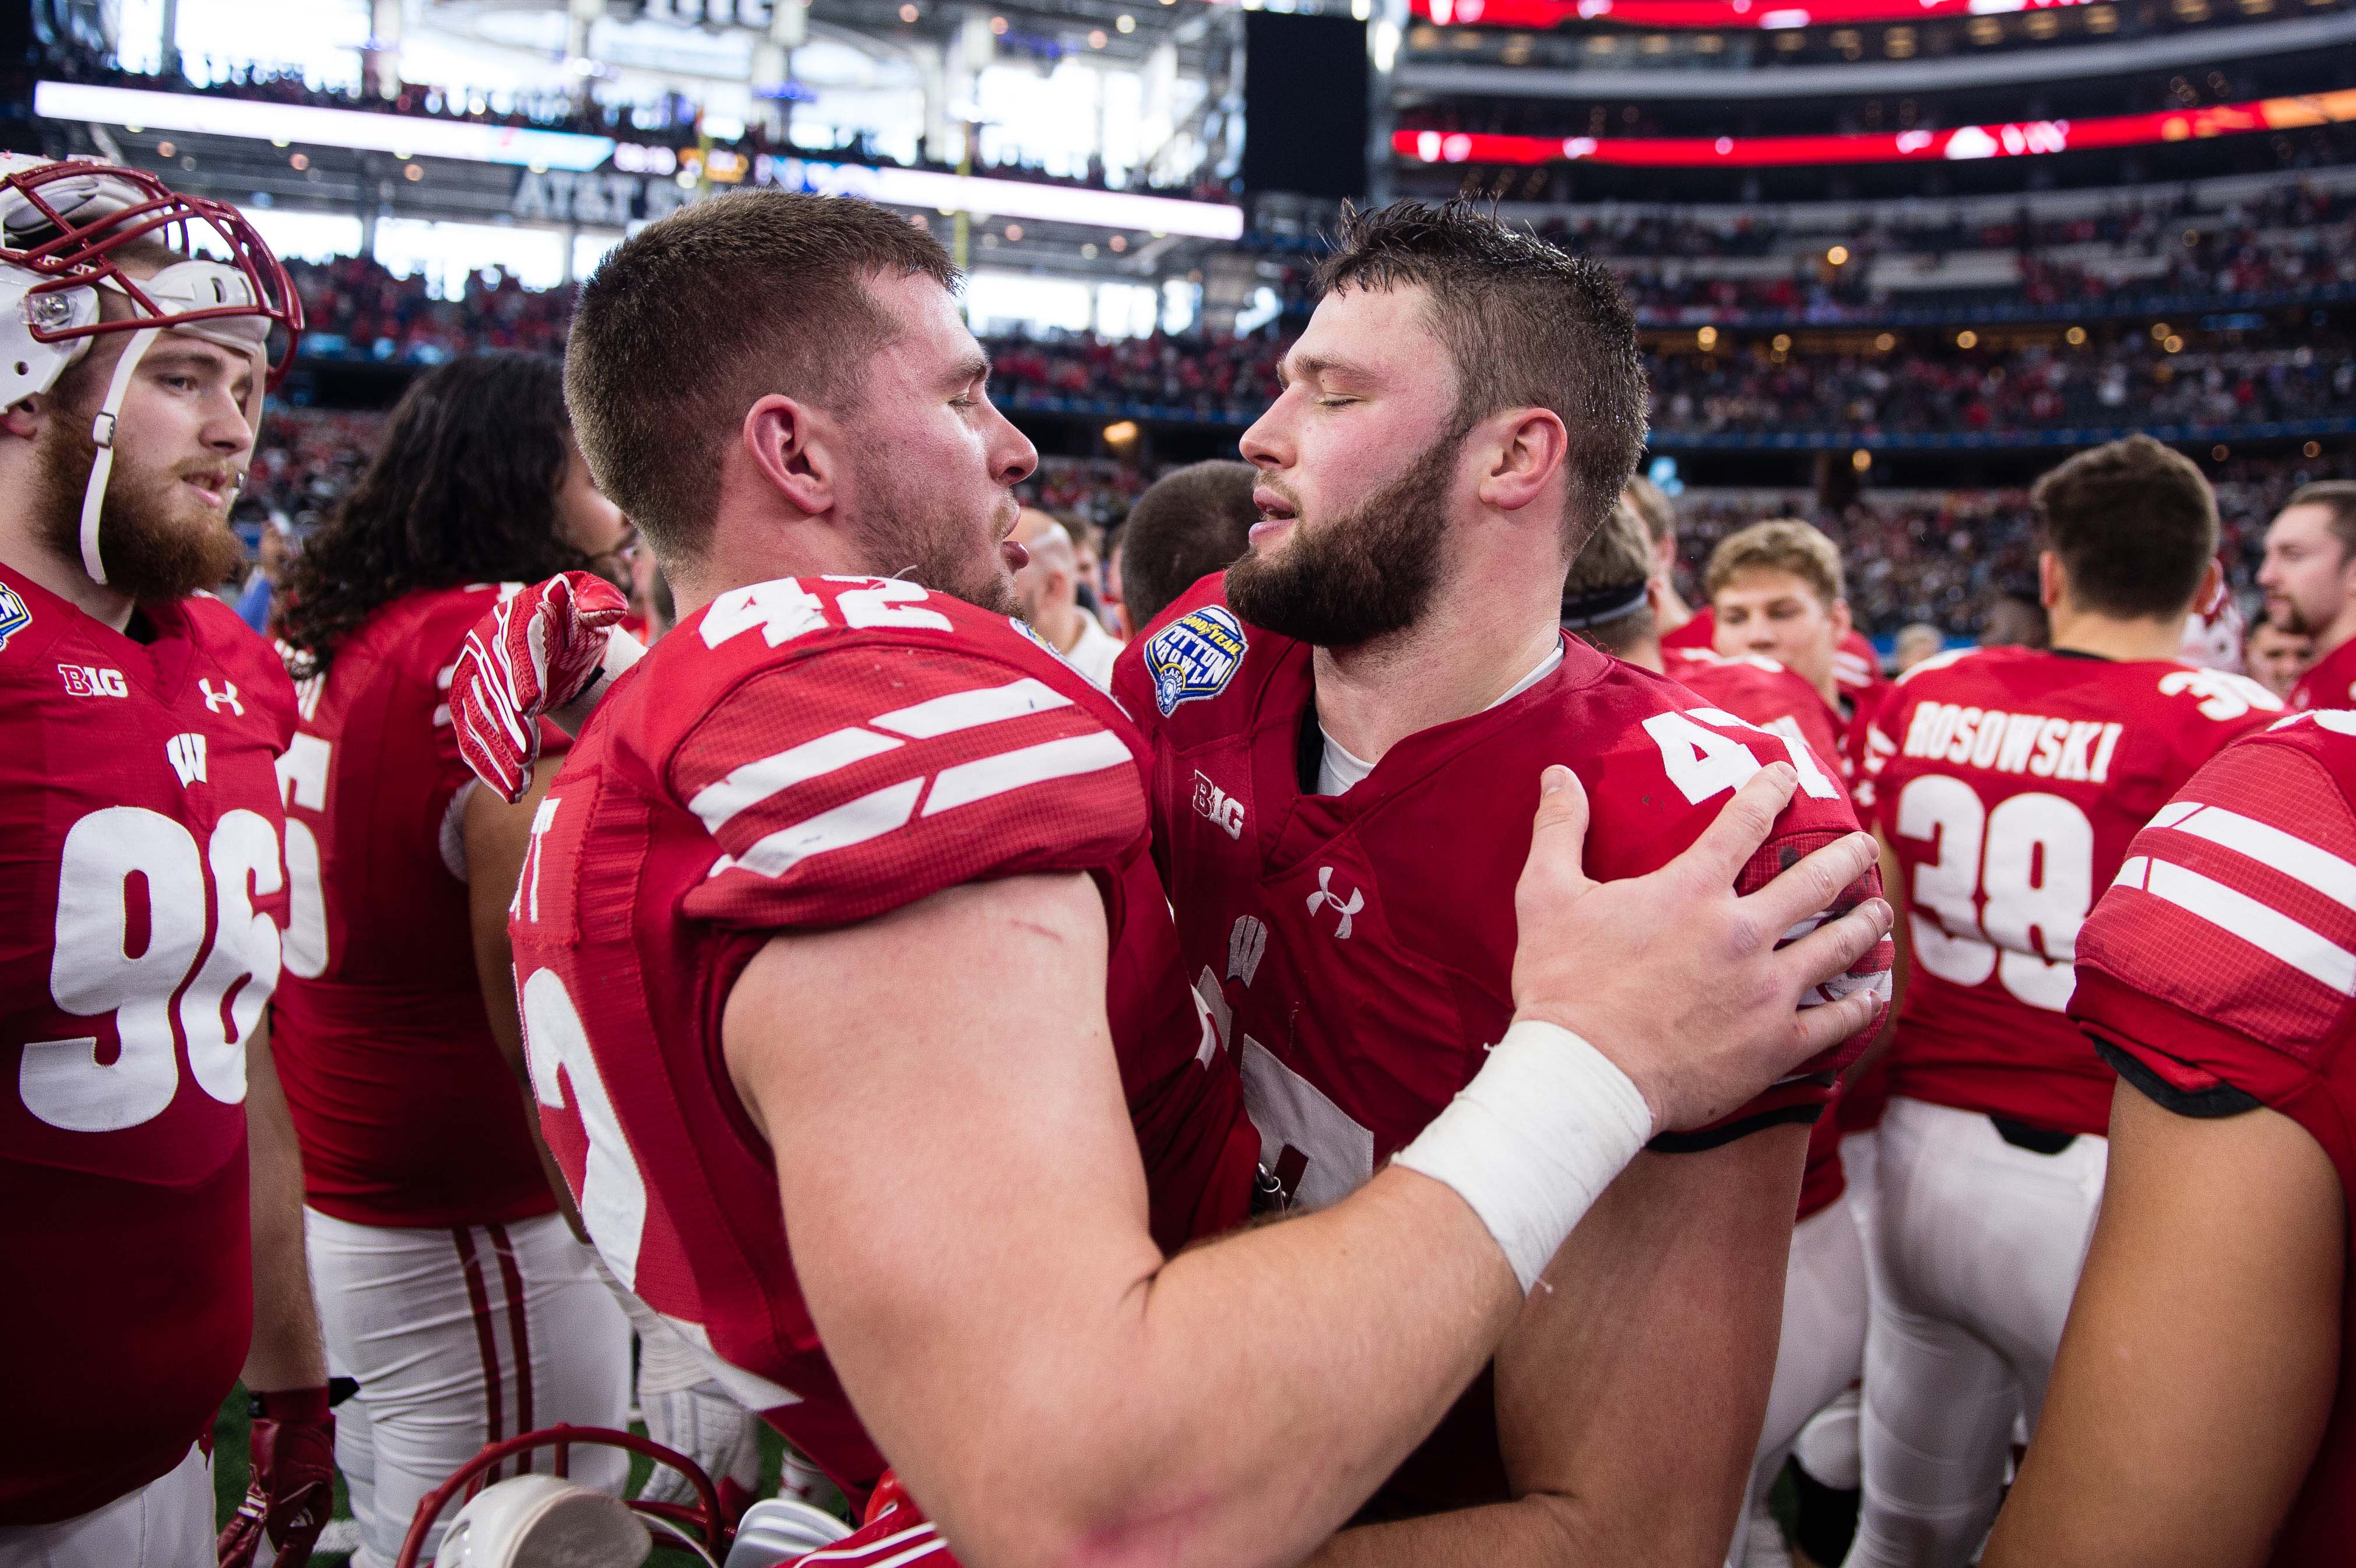 Vince Biegel is One of Our Own Wisconsin LB drafted by Green Bay Packers